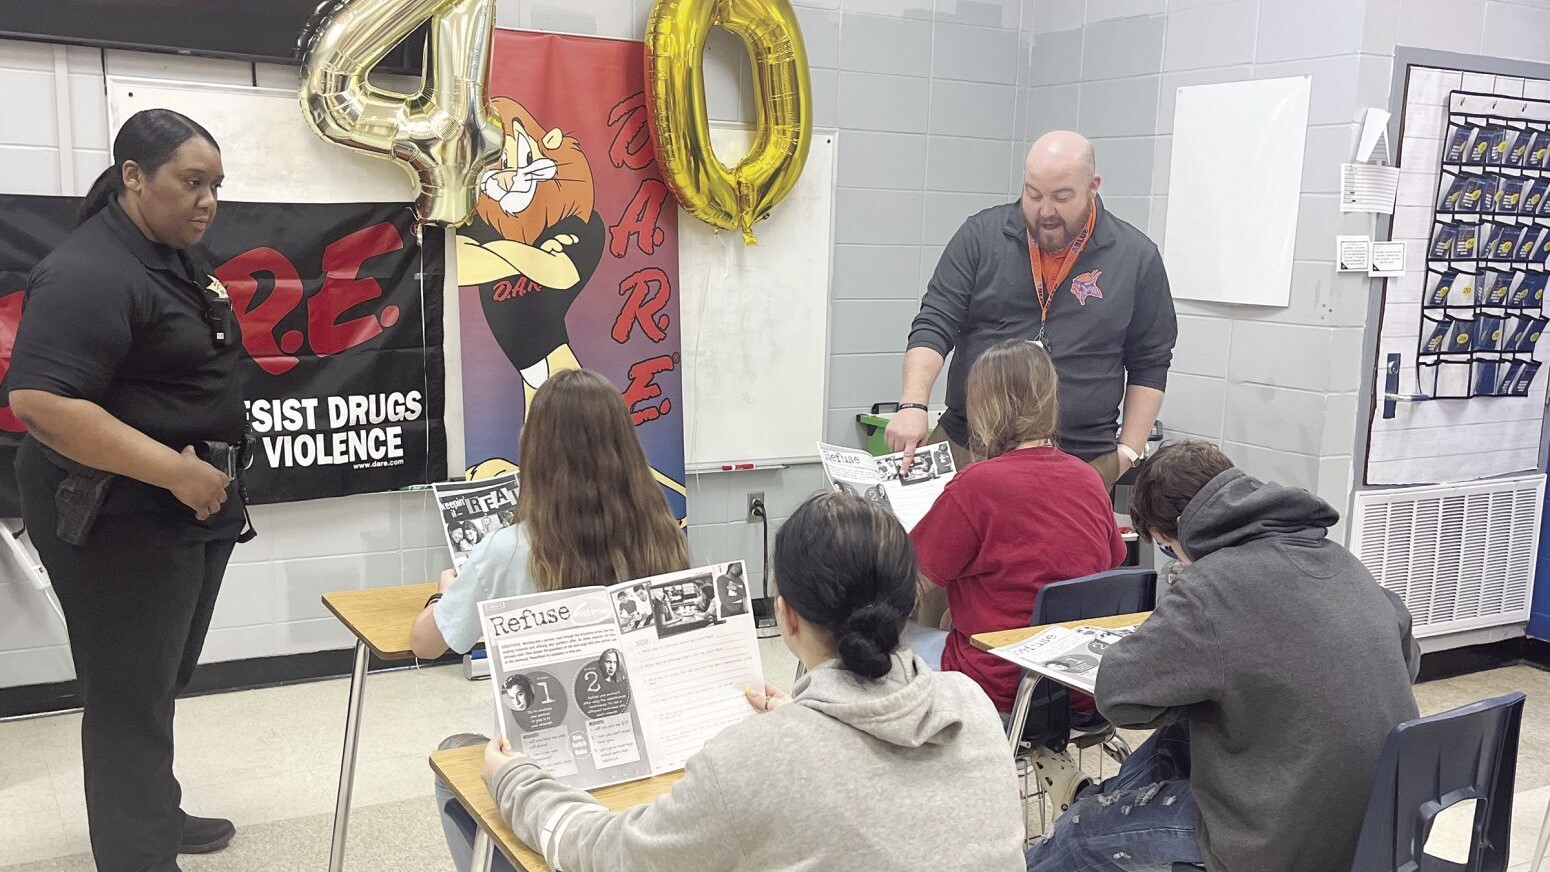 D.A.R.E. Officer Shermila McKinney (left) teaches a group of students at North Pontotoc Middle School. D.A.R.E. lessons include topics on the prevention of drug and alcohol use, violence, bullying, vaping, and internet dangers. North Pontotoc Middle School Principal Jim Matthews (right) routinely visits the D.A.R.E class to show his support and provide encouragement to the students to make good decisions. Students complete their weekly lessons in their D.A.R.E. planners, as they listen and complete tasks as a group.